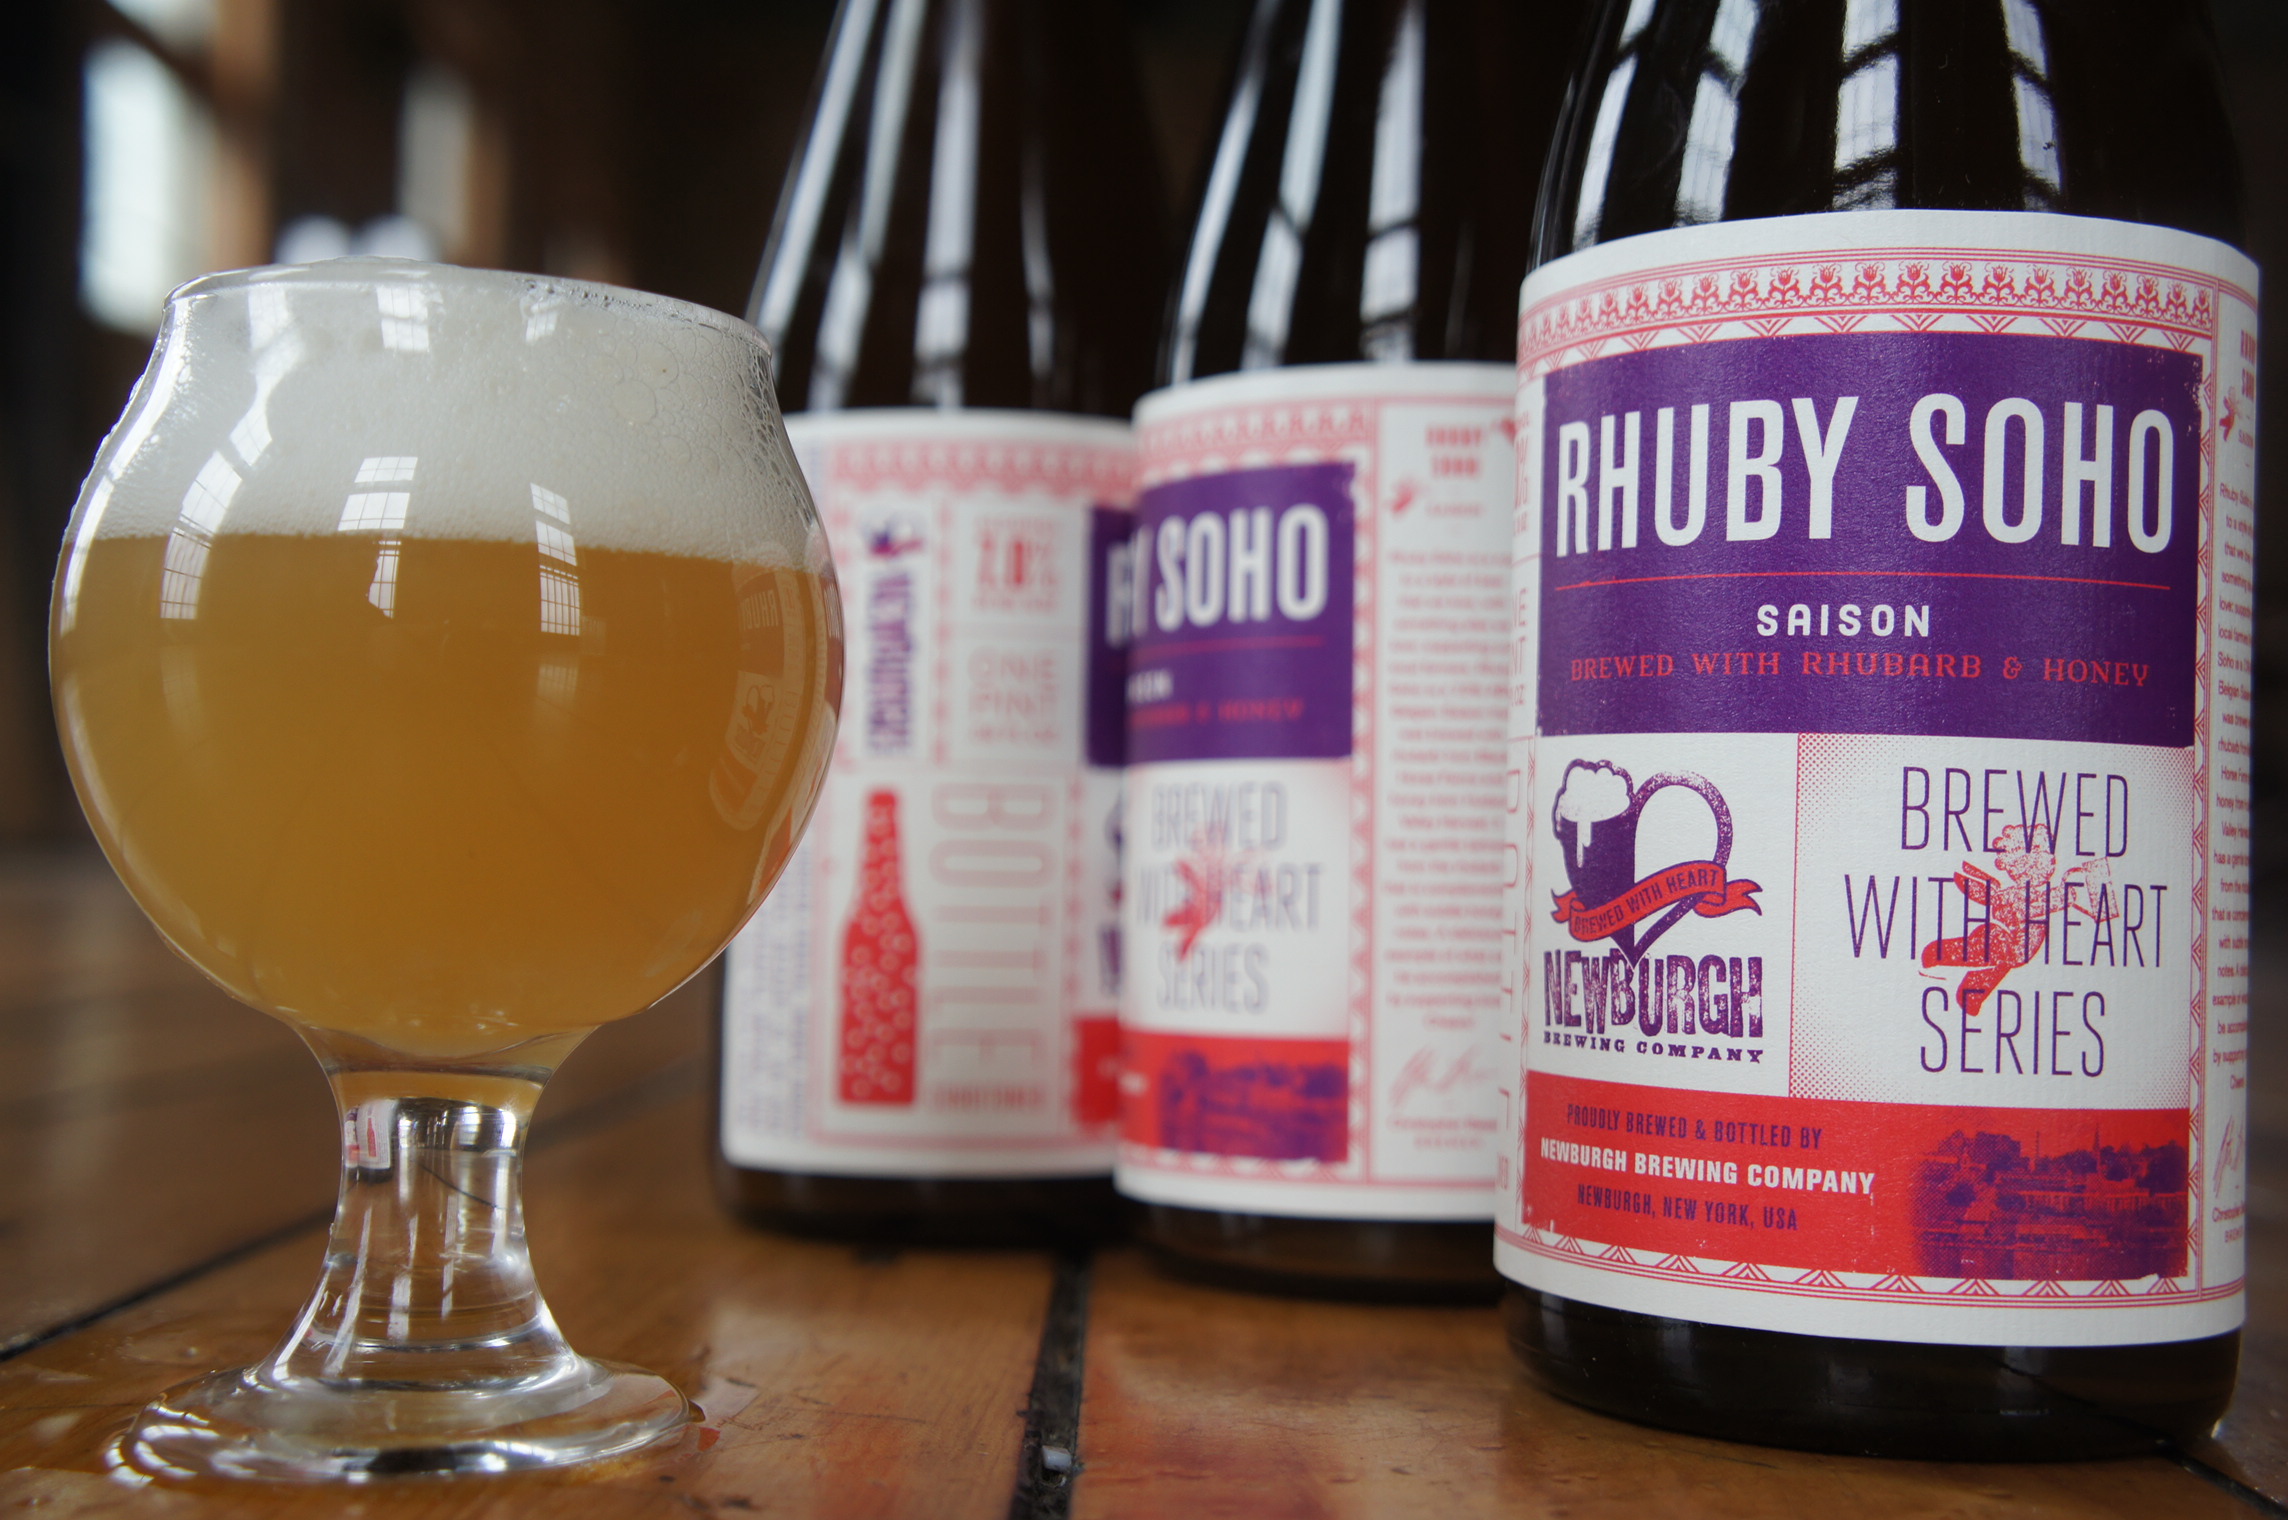 Whole Foods Market in collaboration with Newburgh Brewing Co. launches Rhuby Soho 